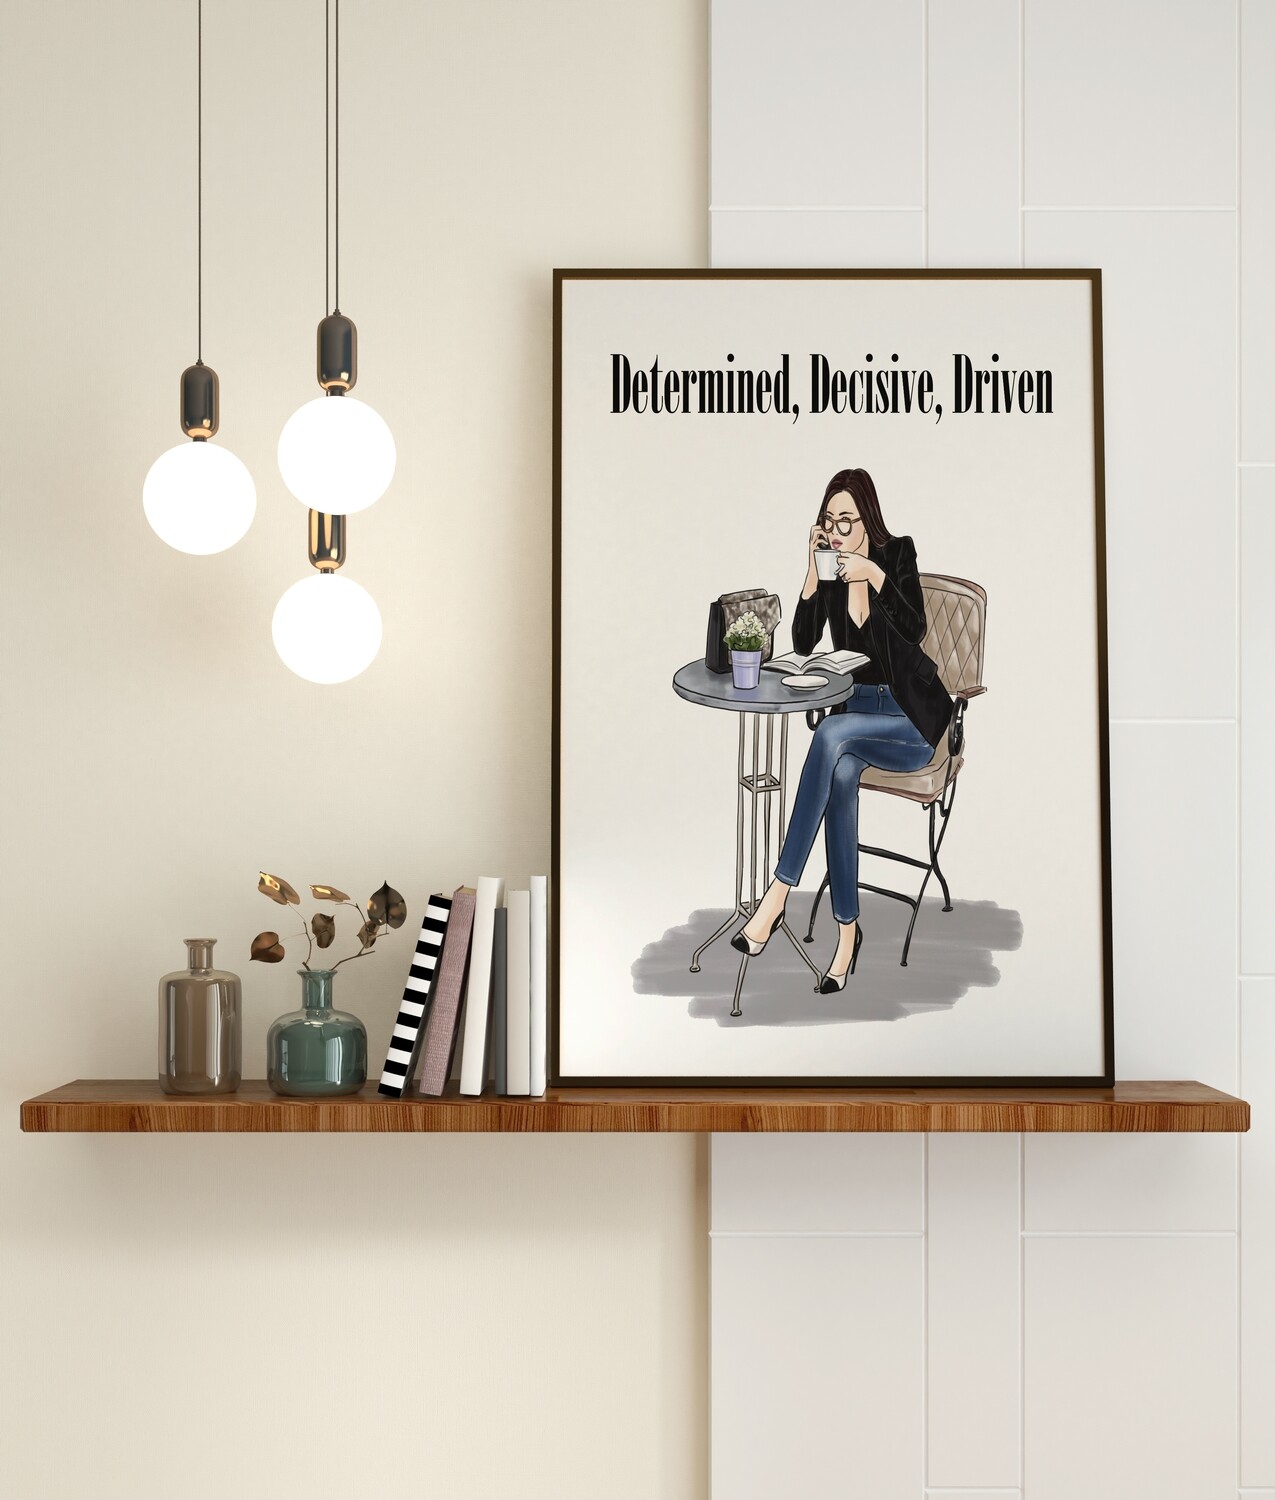 Determined, Decisive, Driven Motivating wall art white skinned woman